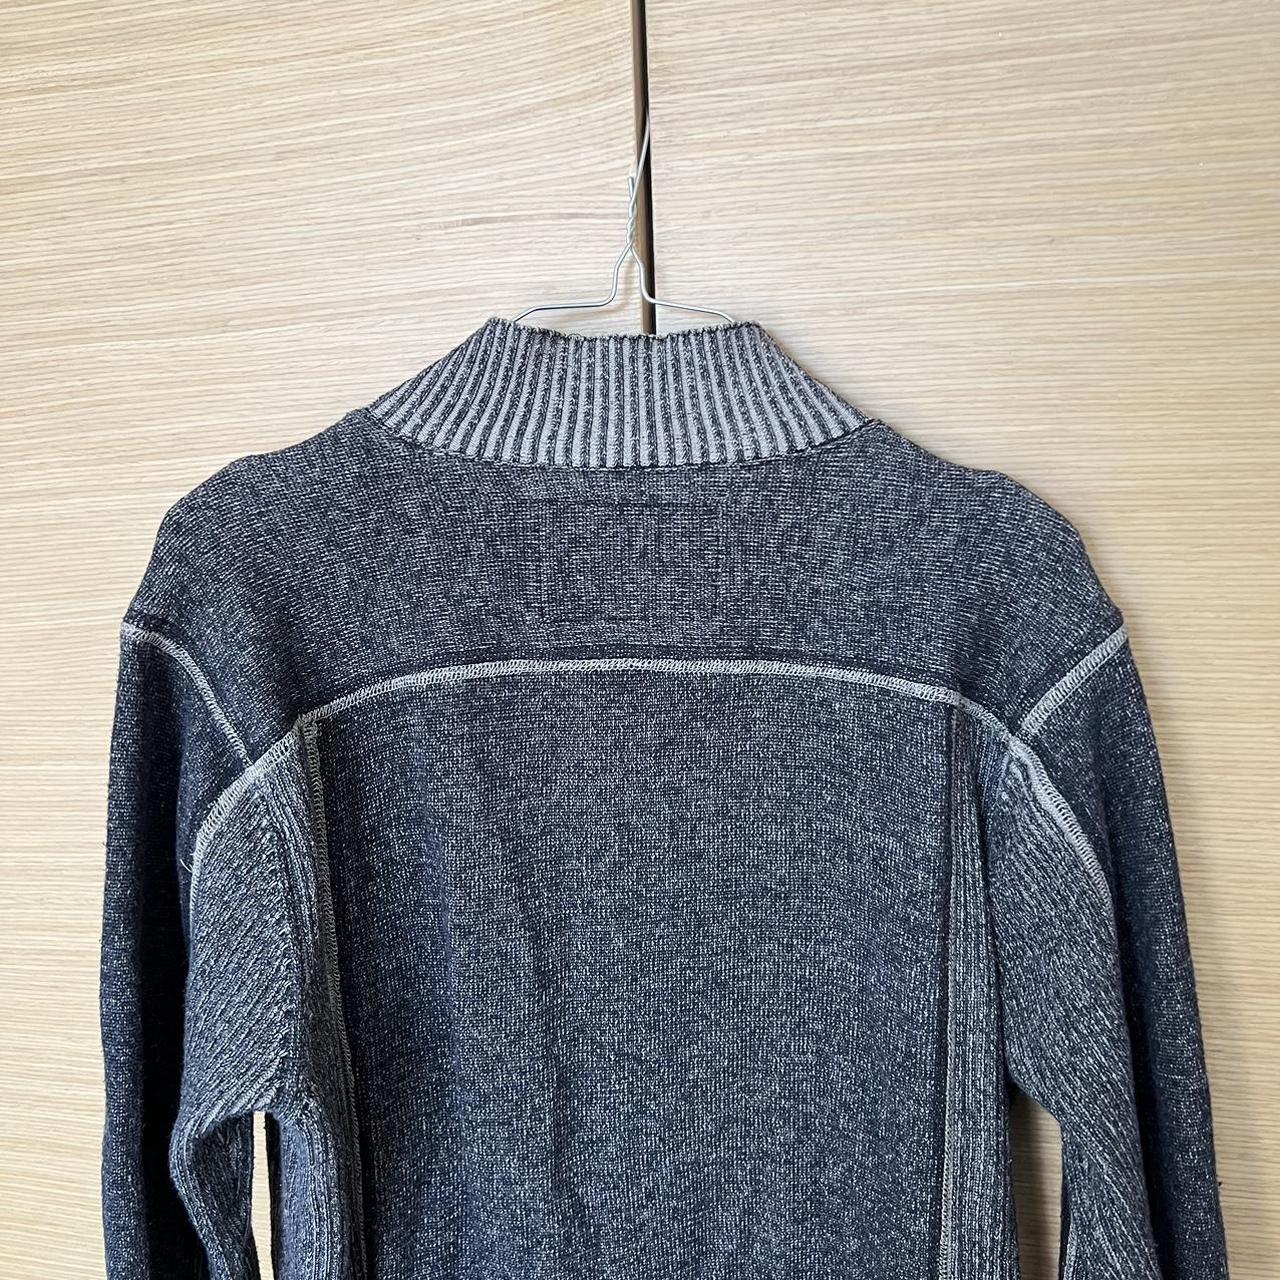 two tone knitted jacket faded grey and black,... - Depop